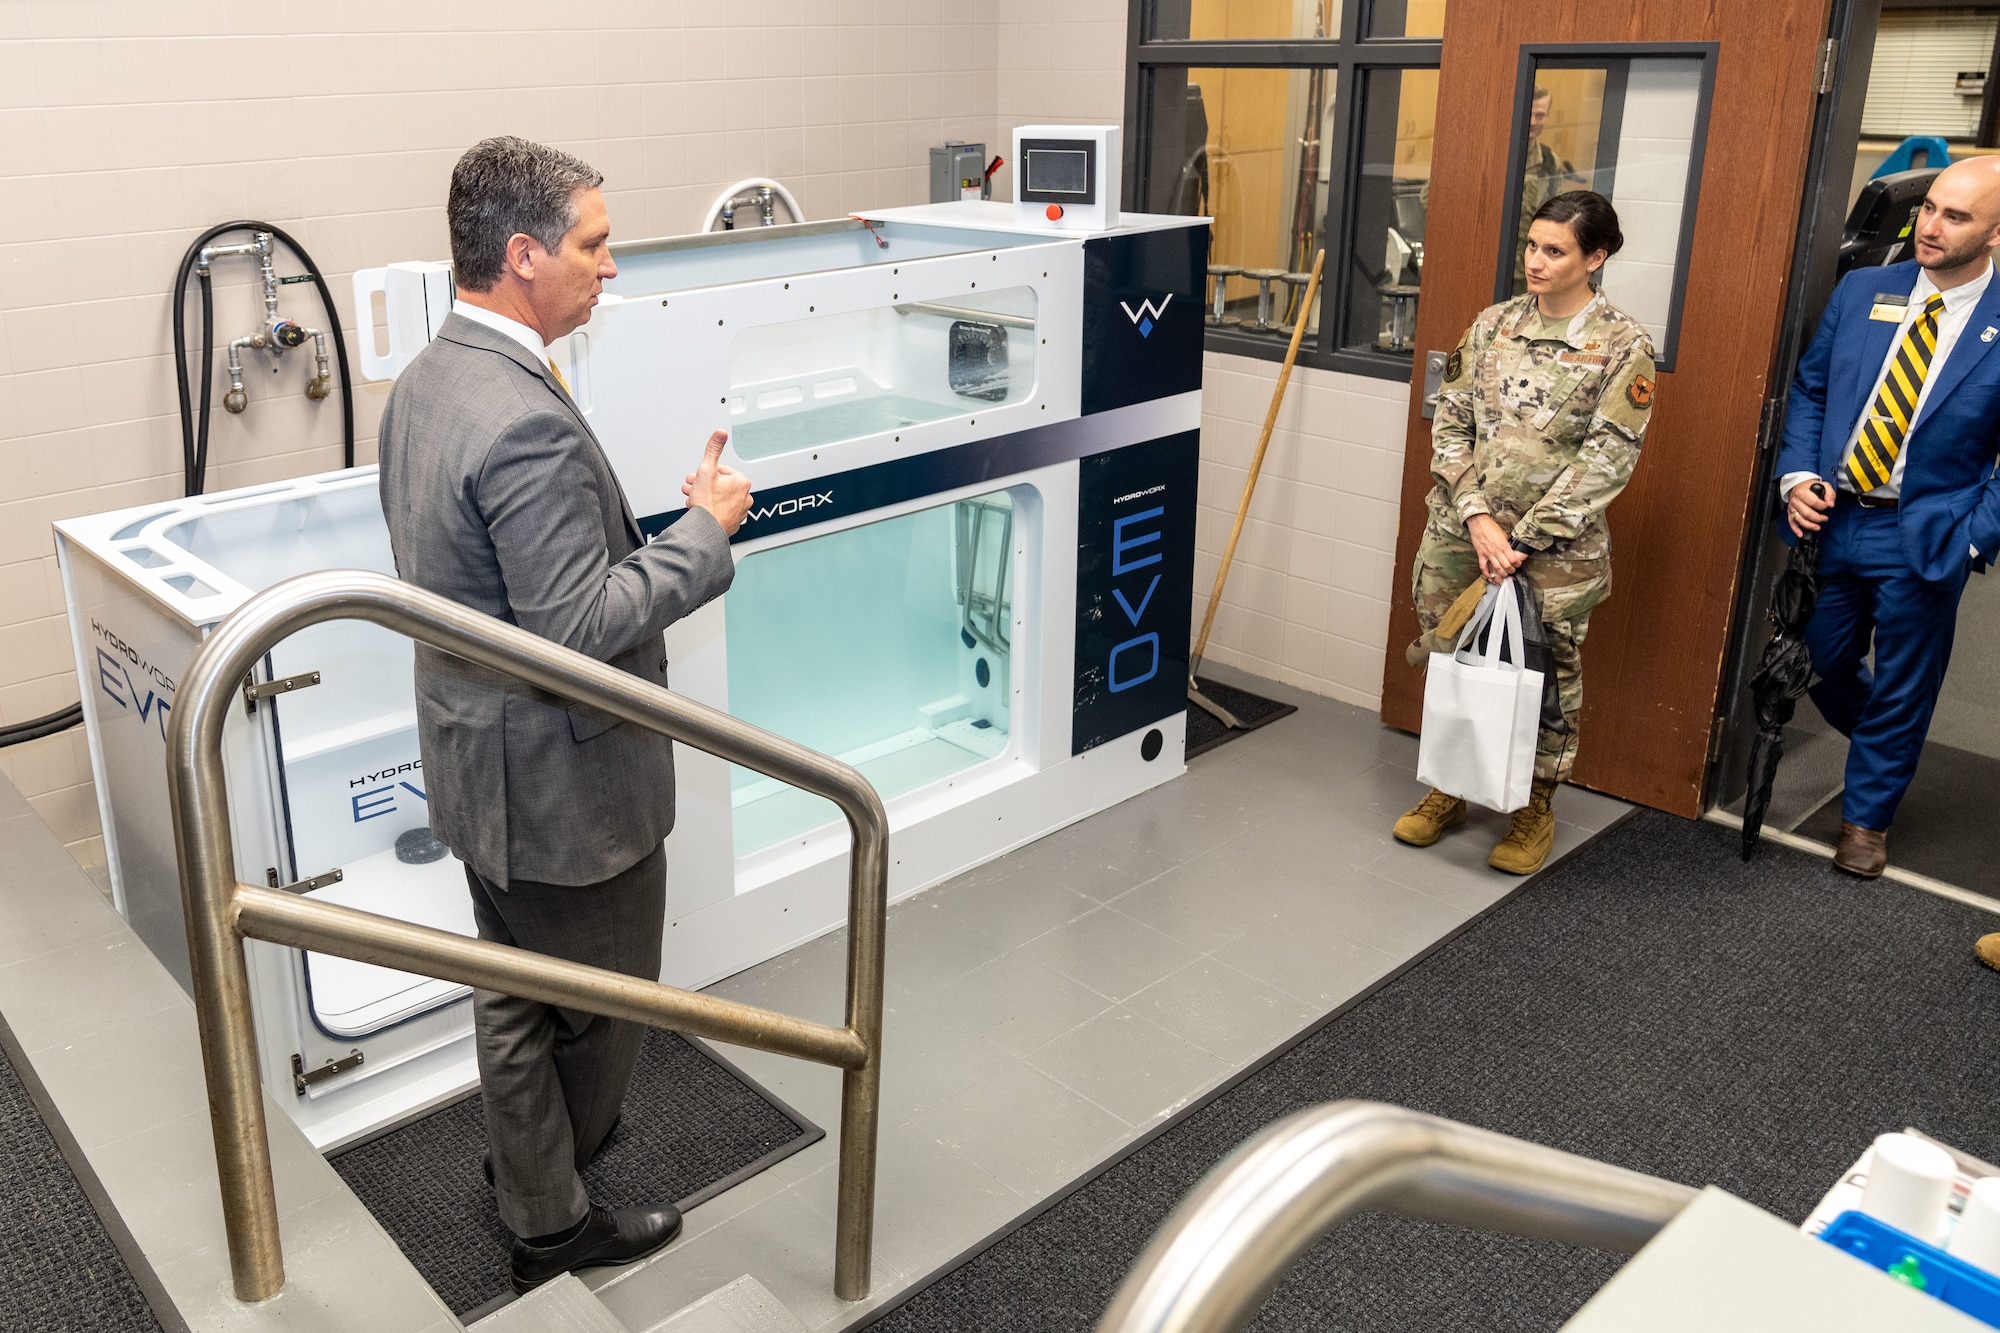 A staff member from the University of Southern Mississippi describes the physical therapy treatments students can receive to Lt. Col. Katherine Kuc, 81st Force Support Squadron commander, and Sawyer Walters, USM development officer, at Hattiesburg, Mississippi, March 1, 2024.